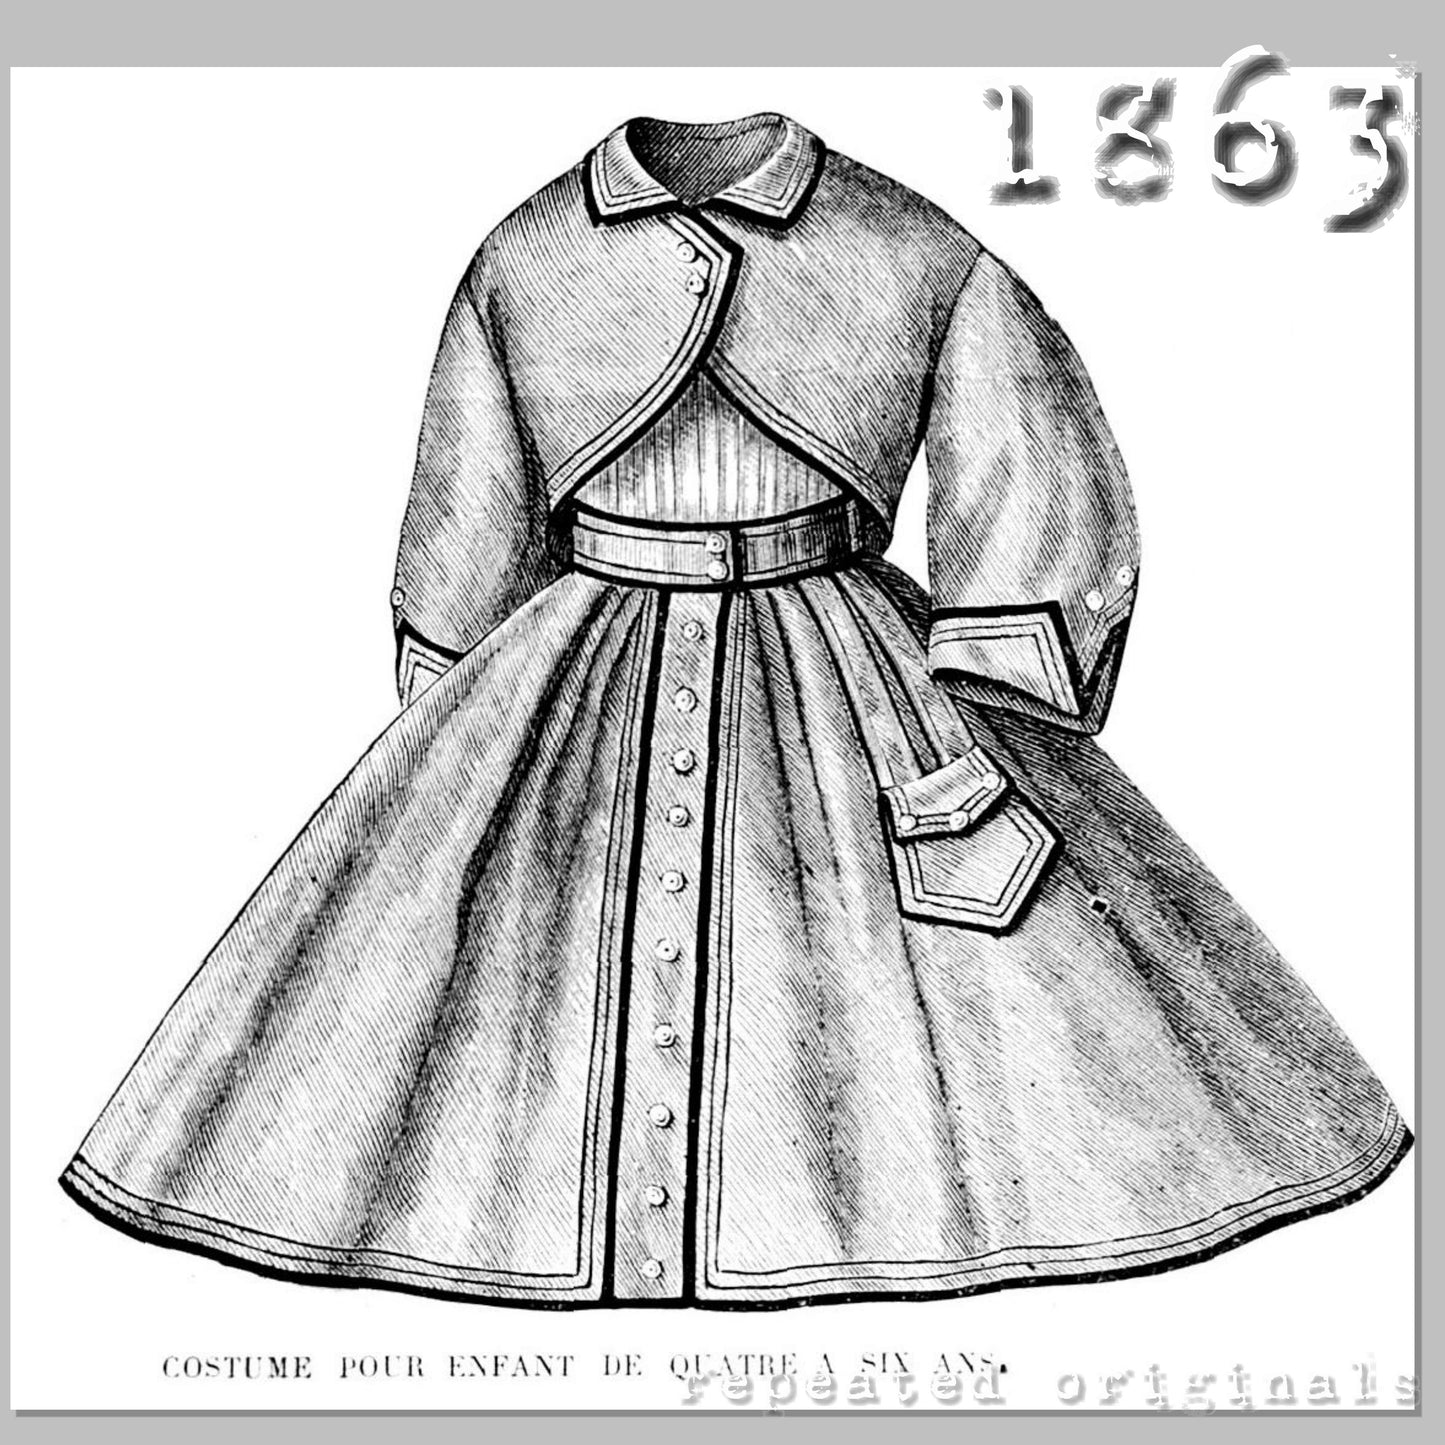 1863 Costume for Child 4 - 6 Years Sewing Pattern - INSTANT DOWNLOAD PDF